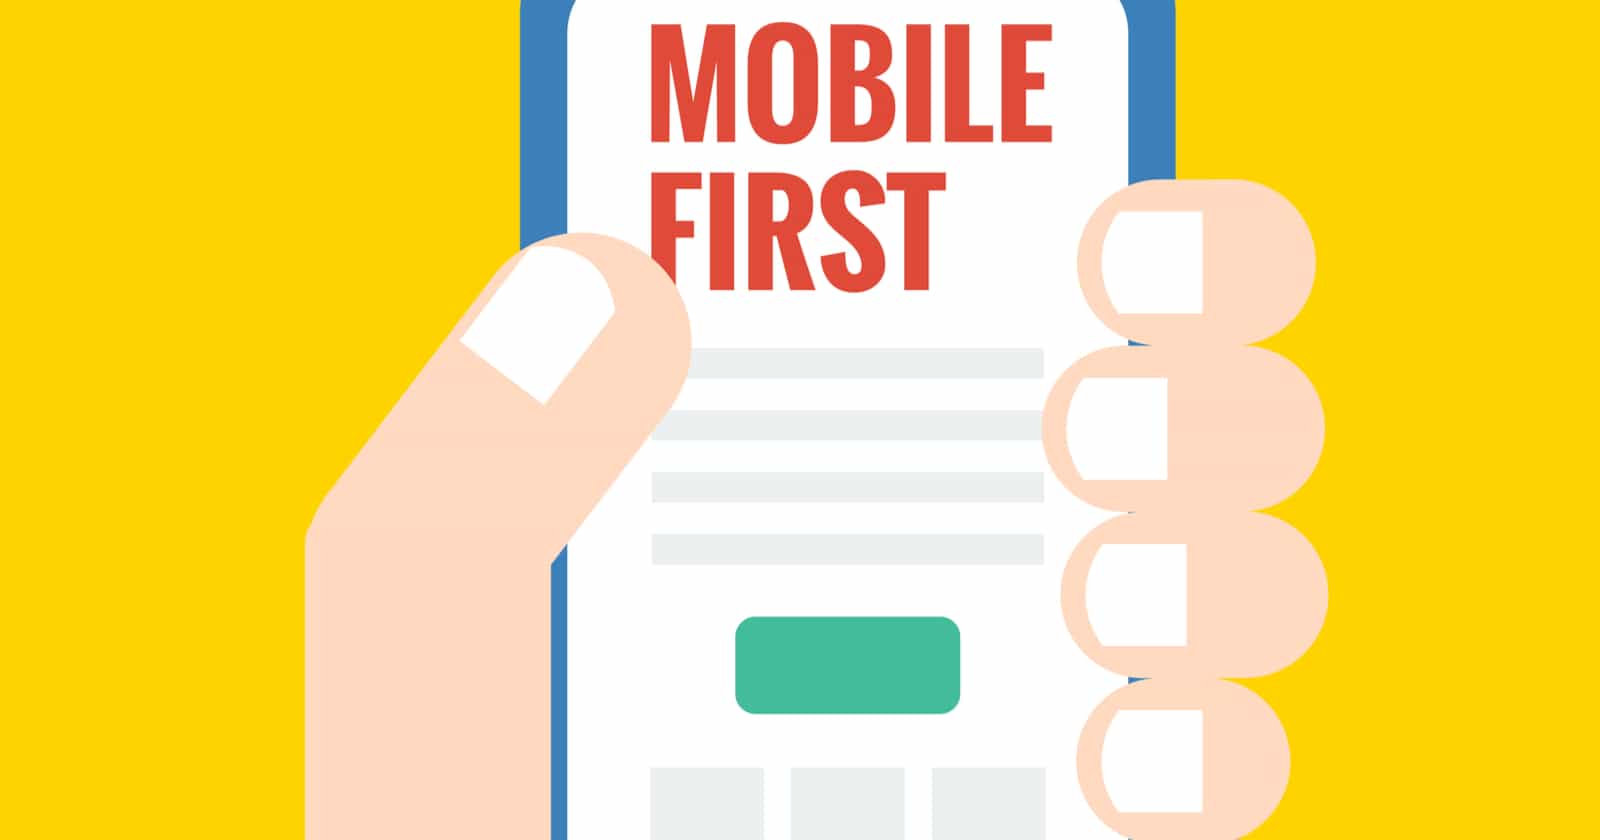 google mobile first index